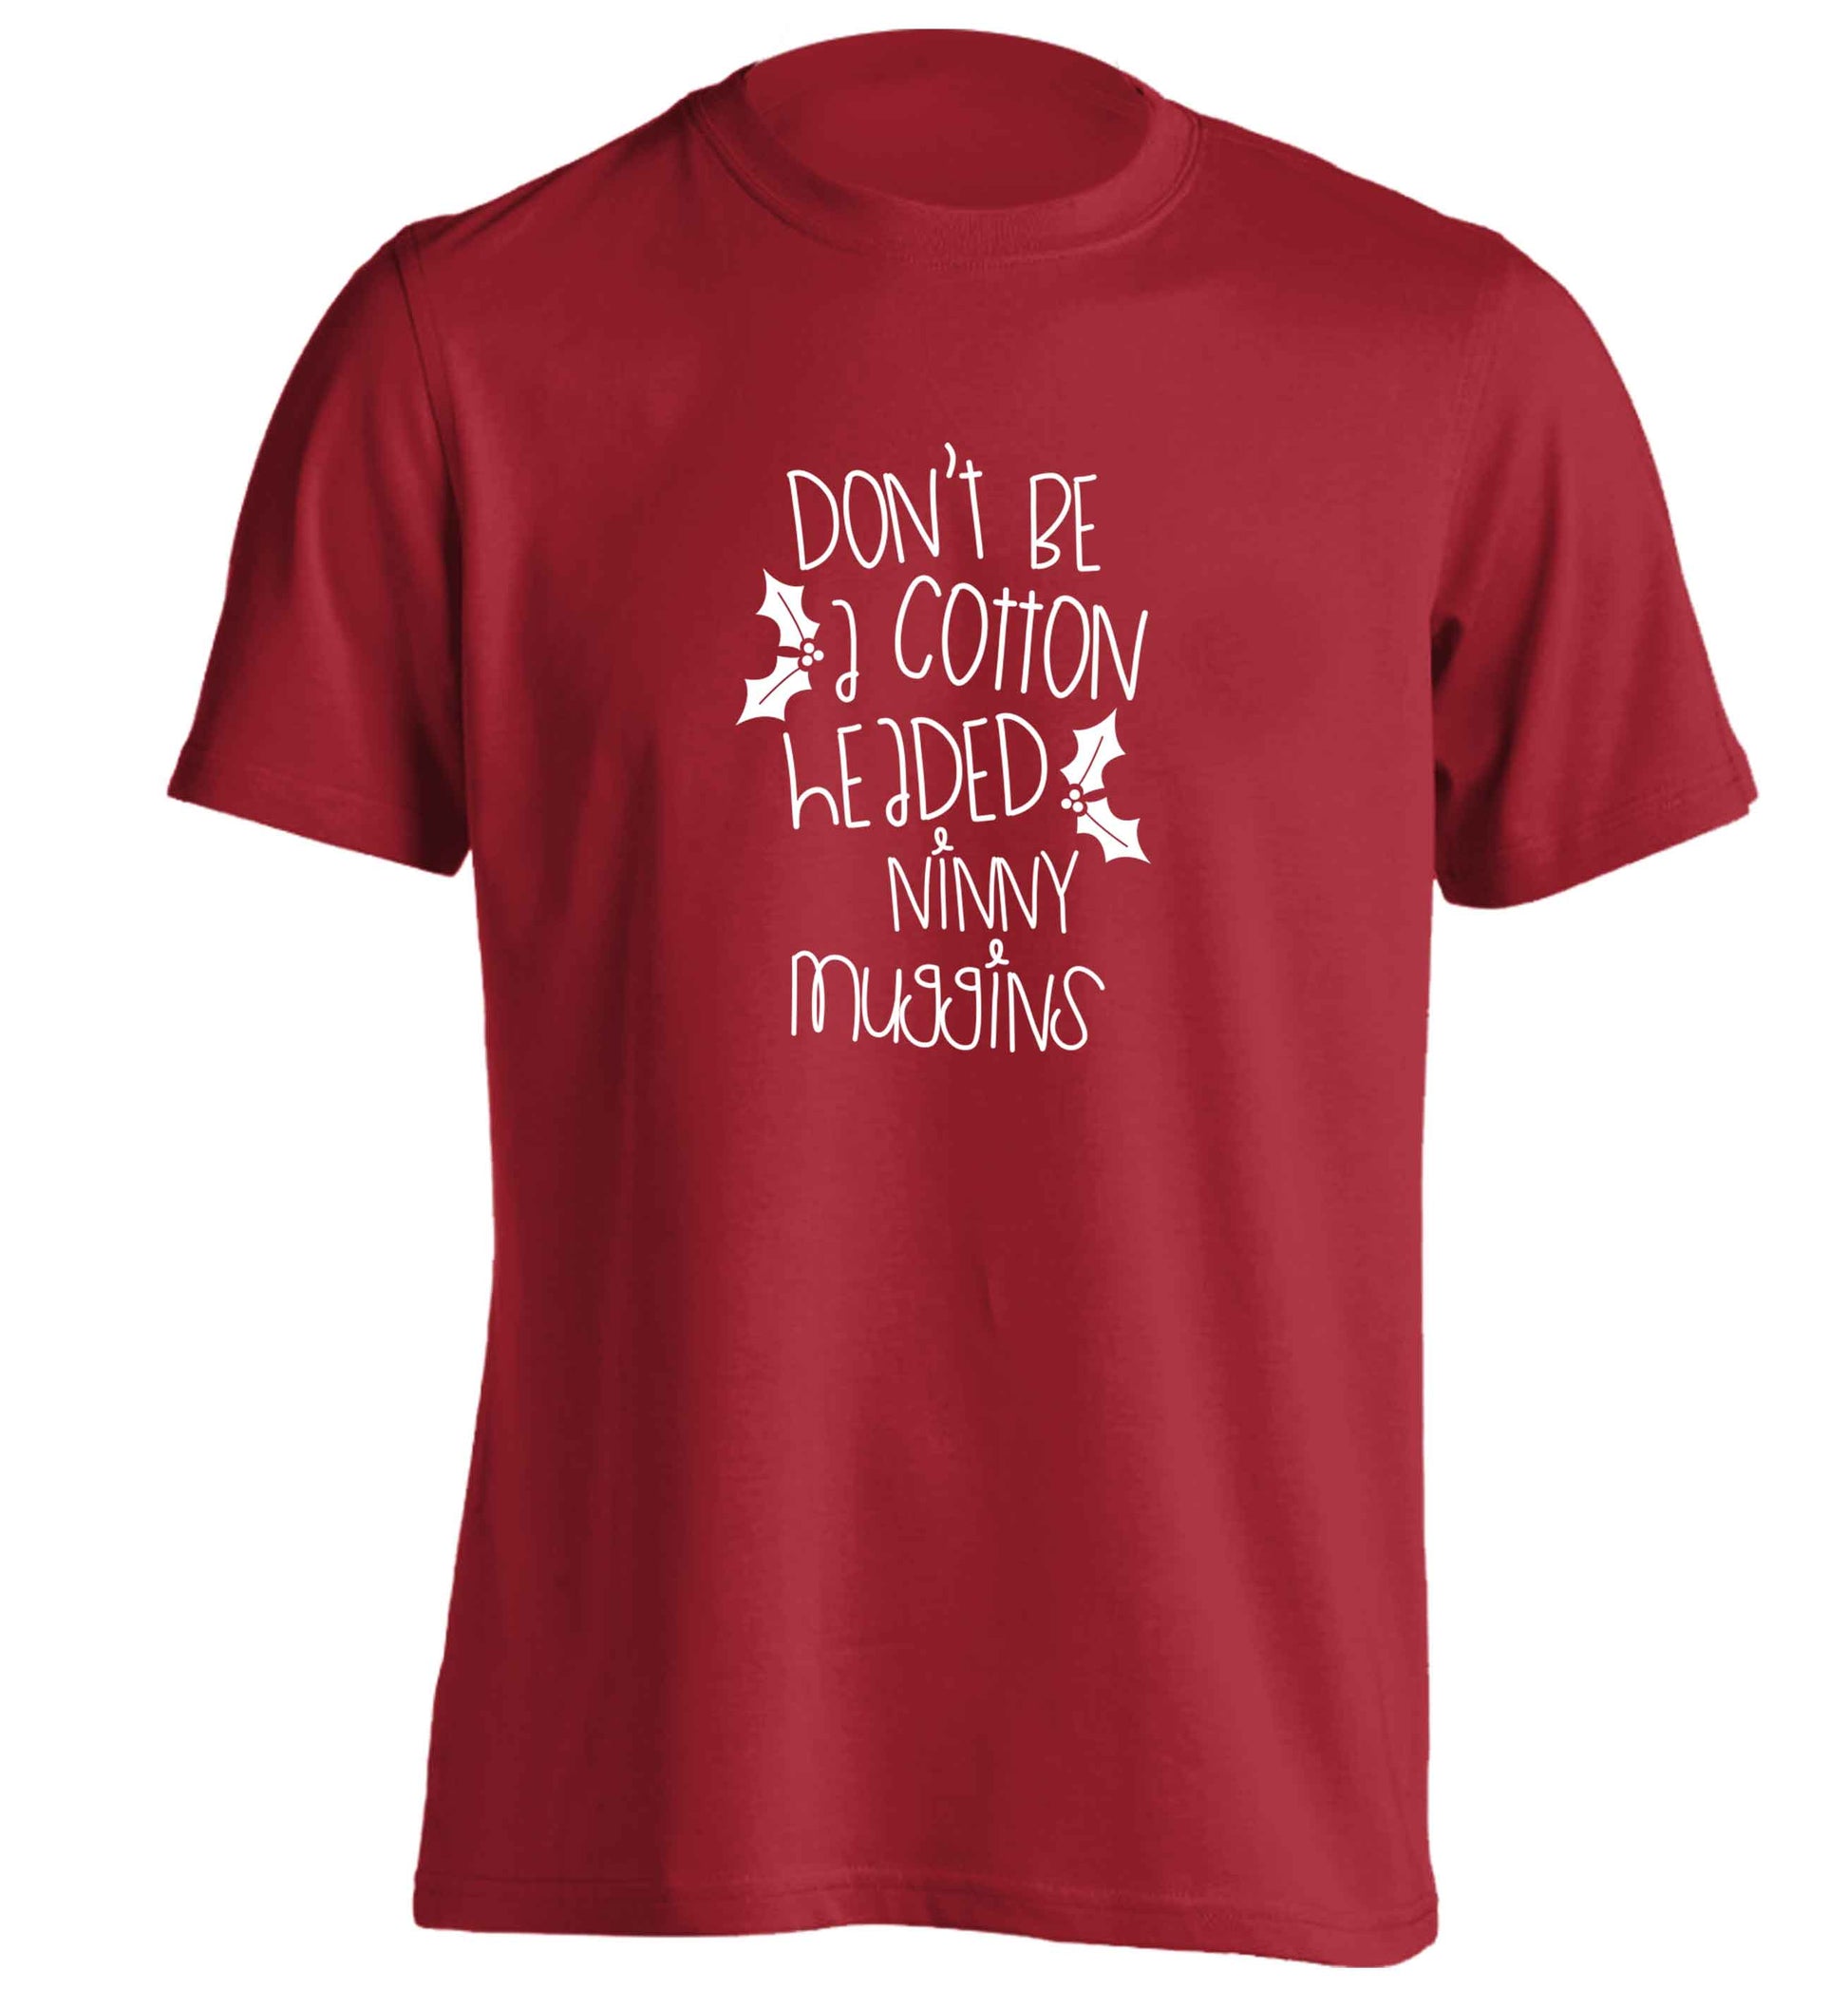 Too Late to be Good adults unisex red Tshirt 2XL